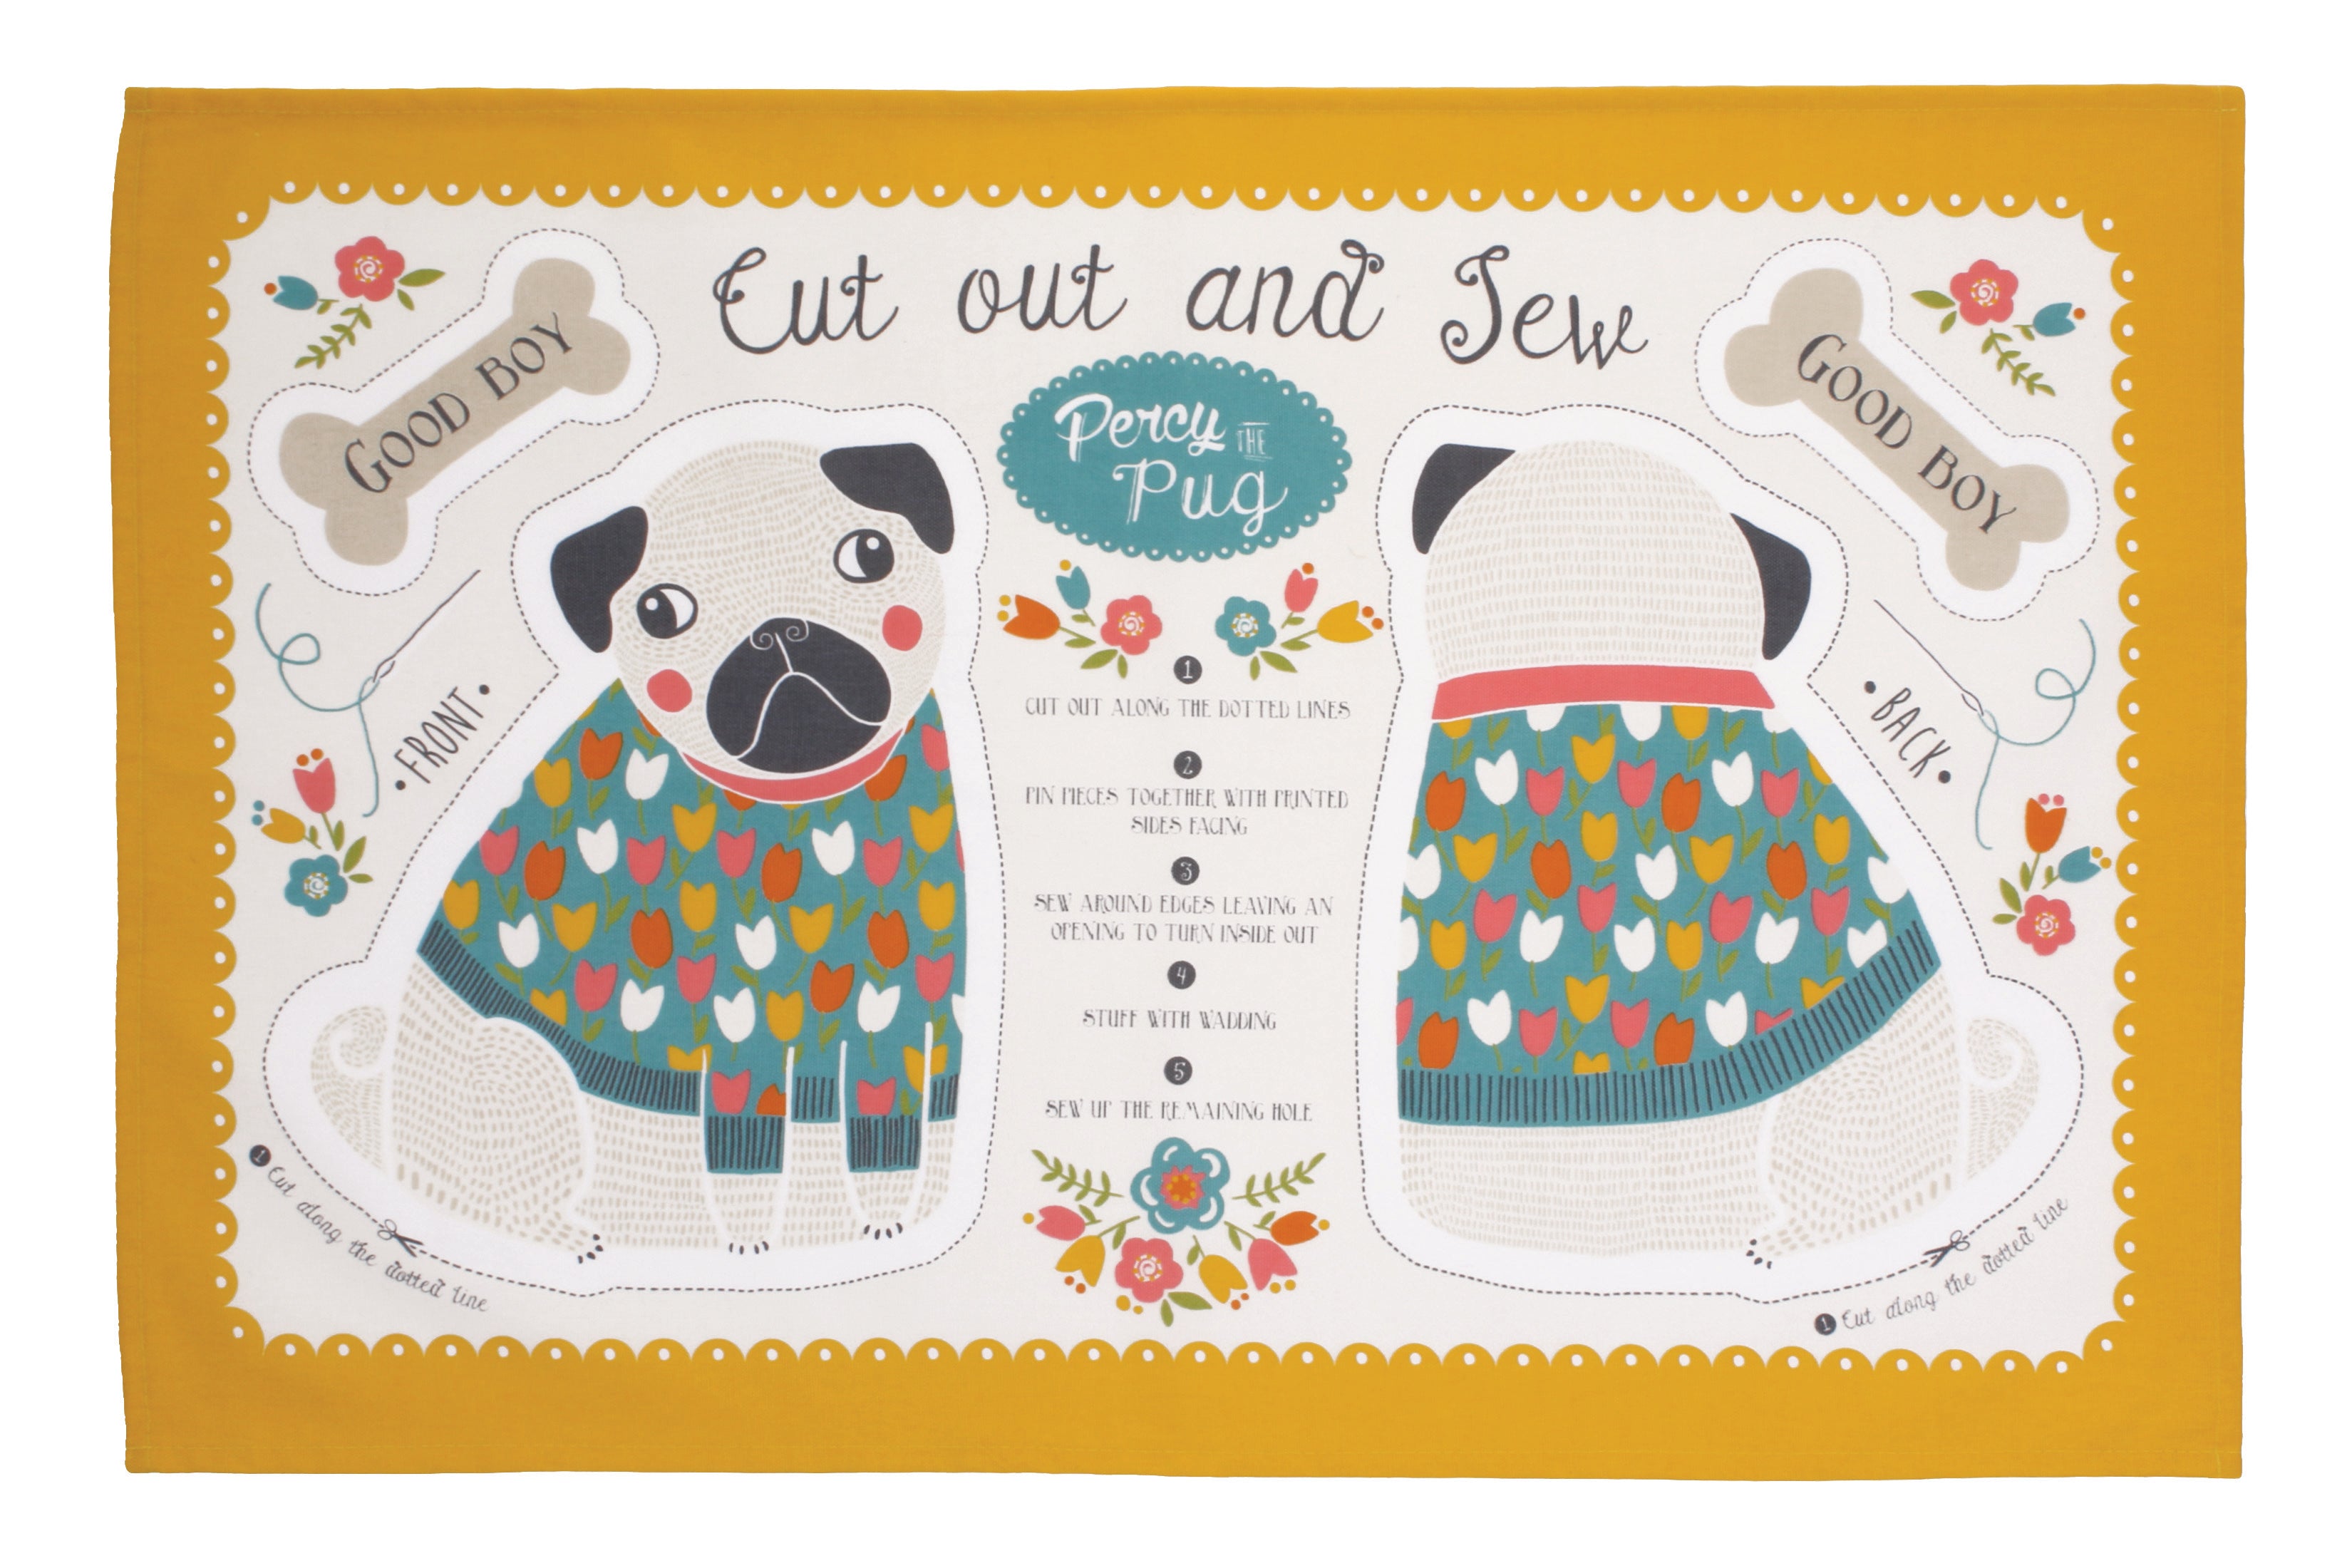 Ulster Weavers, "Percy Pug", Pure cotton tea towel. Printed in the UK. - Home Landing